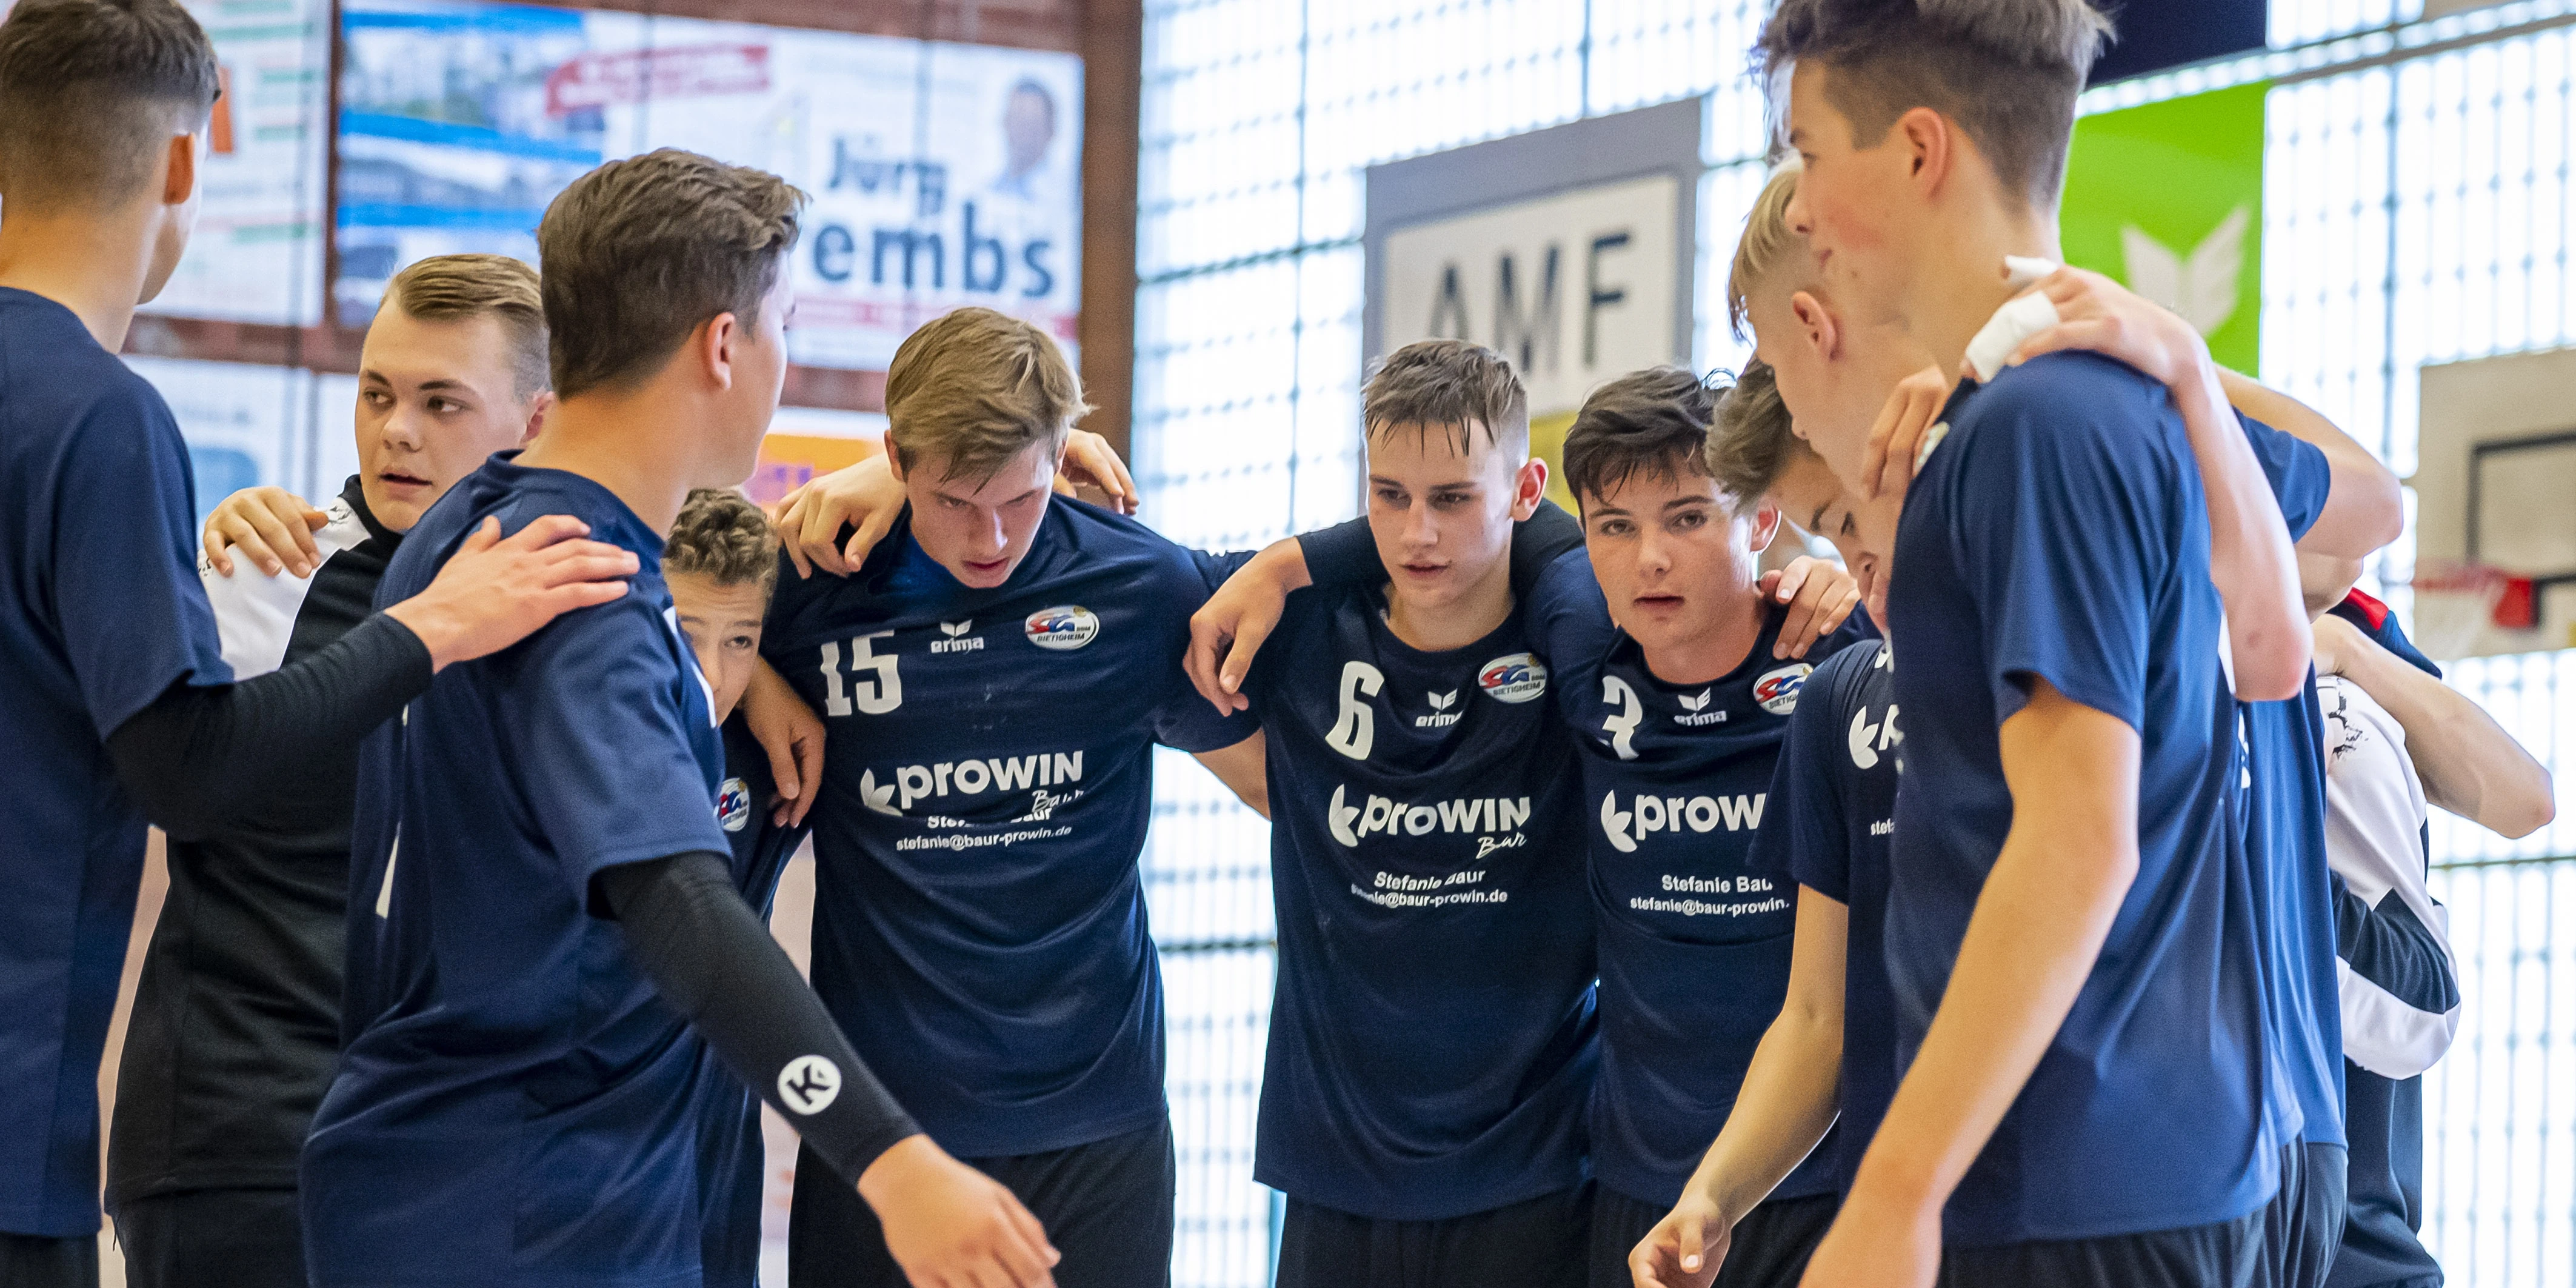 The young players of the SG BBM handball club in Bietigheim-Bissingen are supported by Dürr AG.